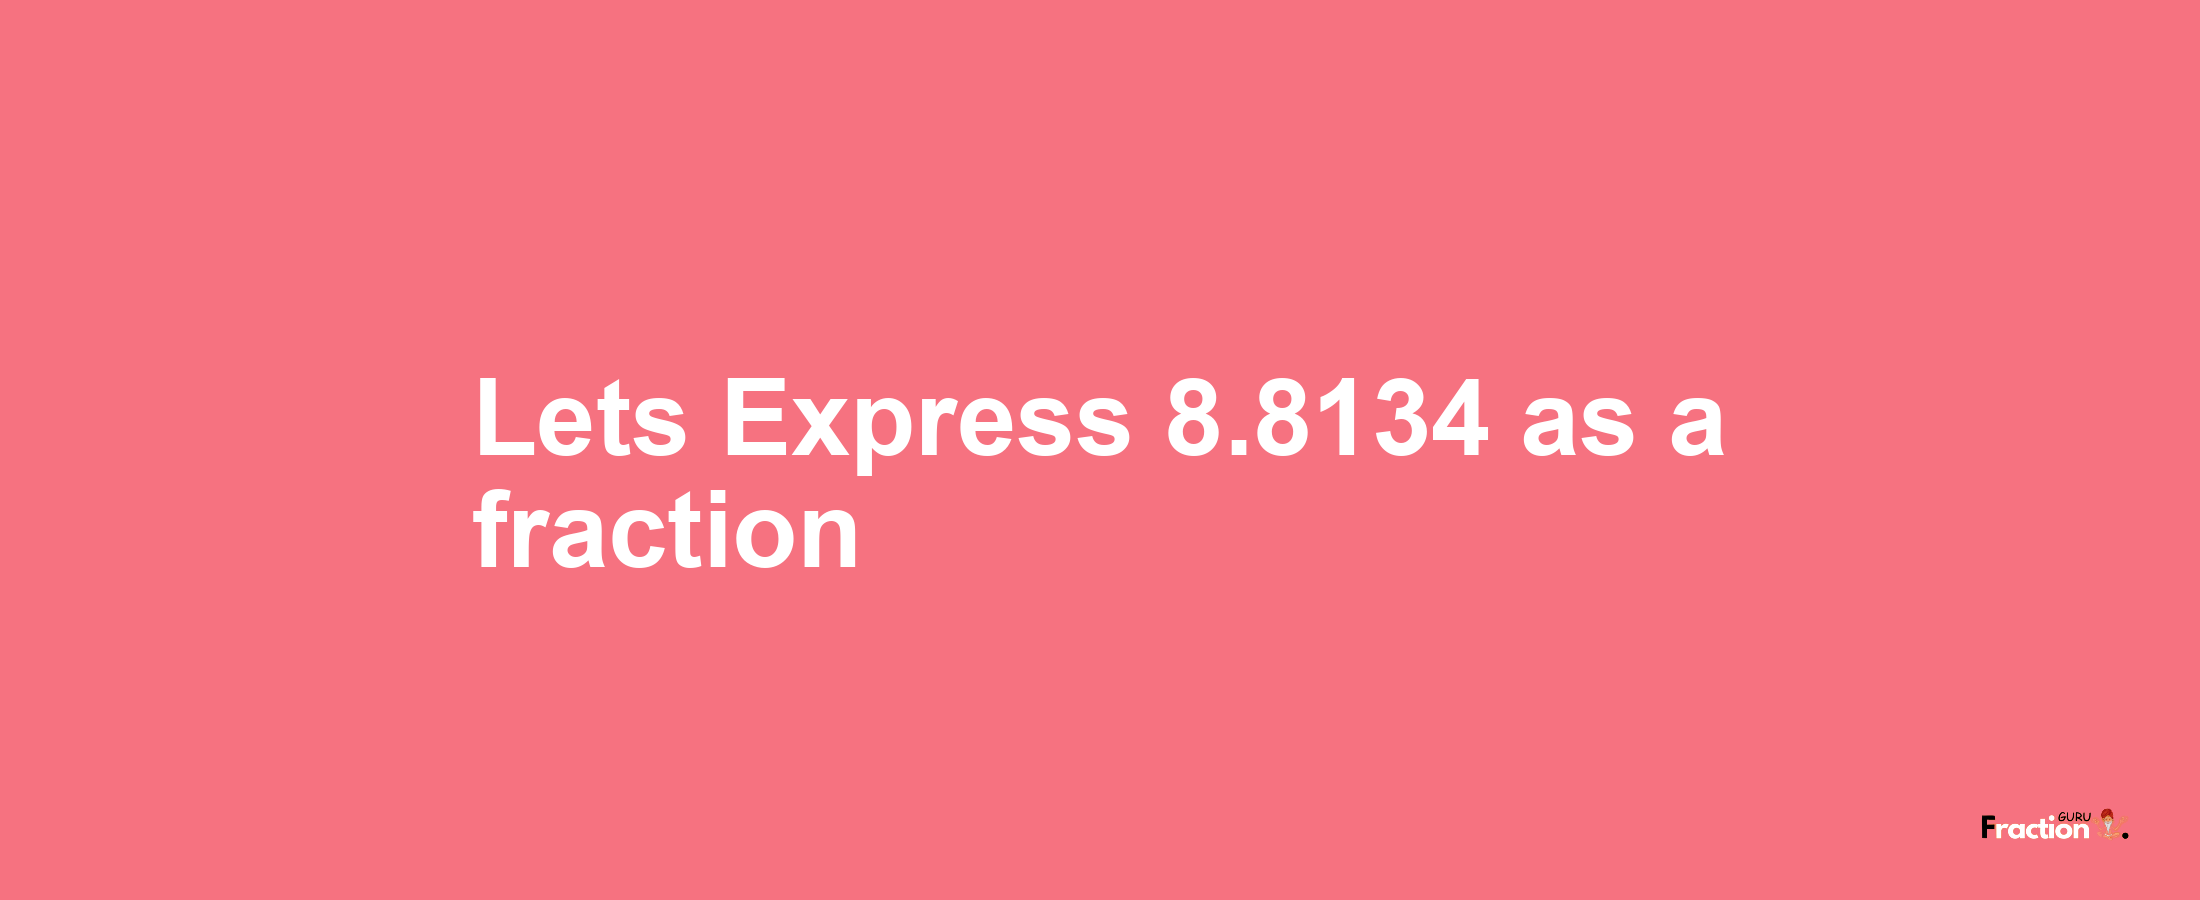 Lets Express 8.8134 as afraction